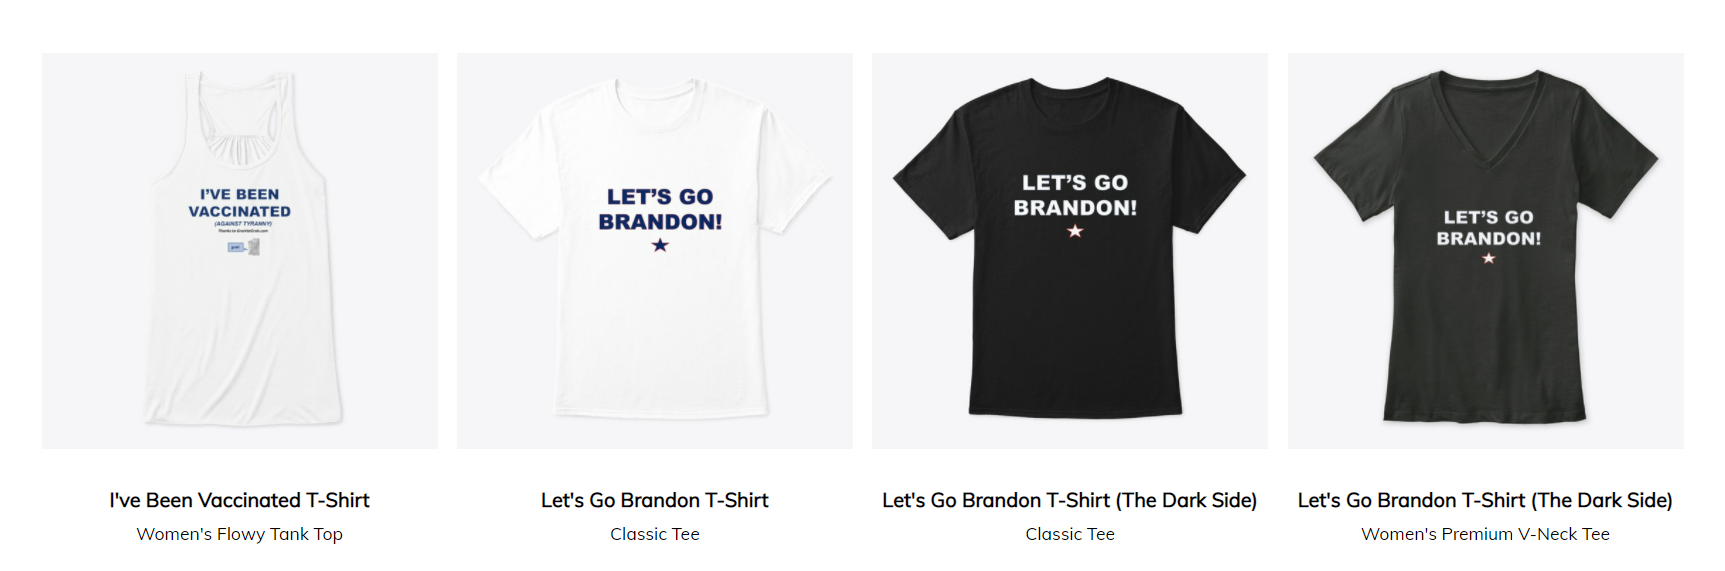 Lets go Brandon Tops and Tees